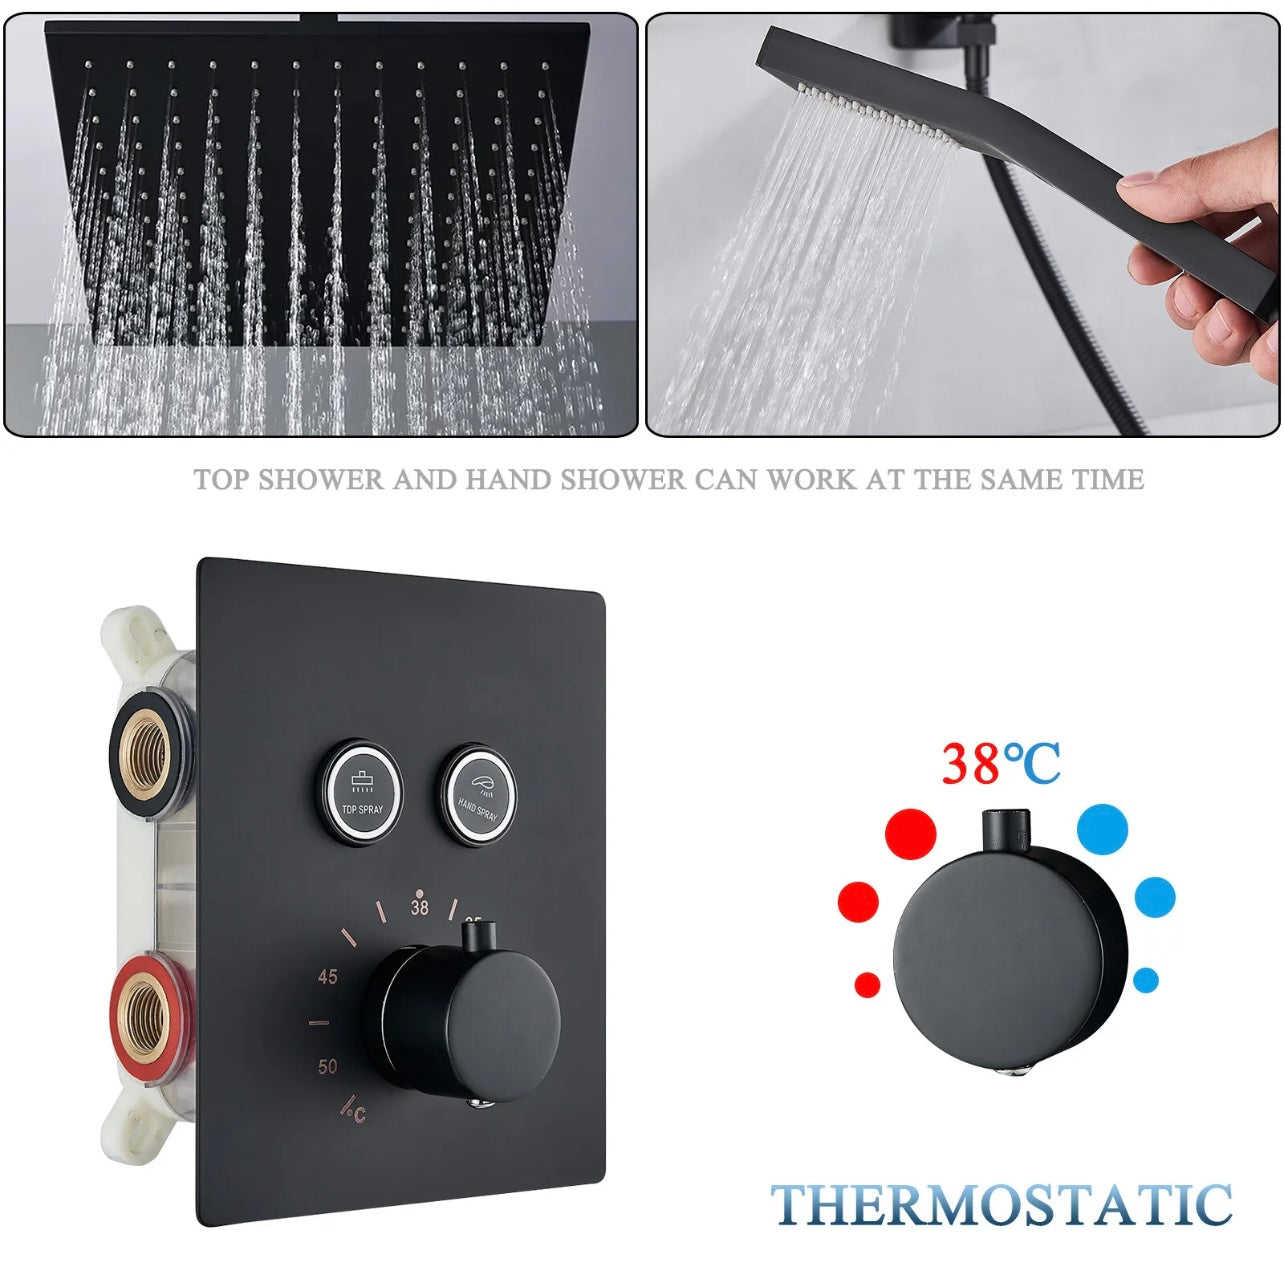 LED thermostatic 2 function rainfall shower system